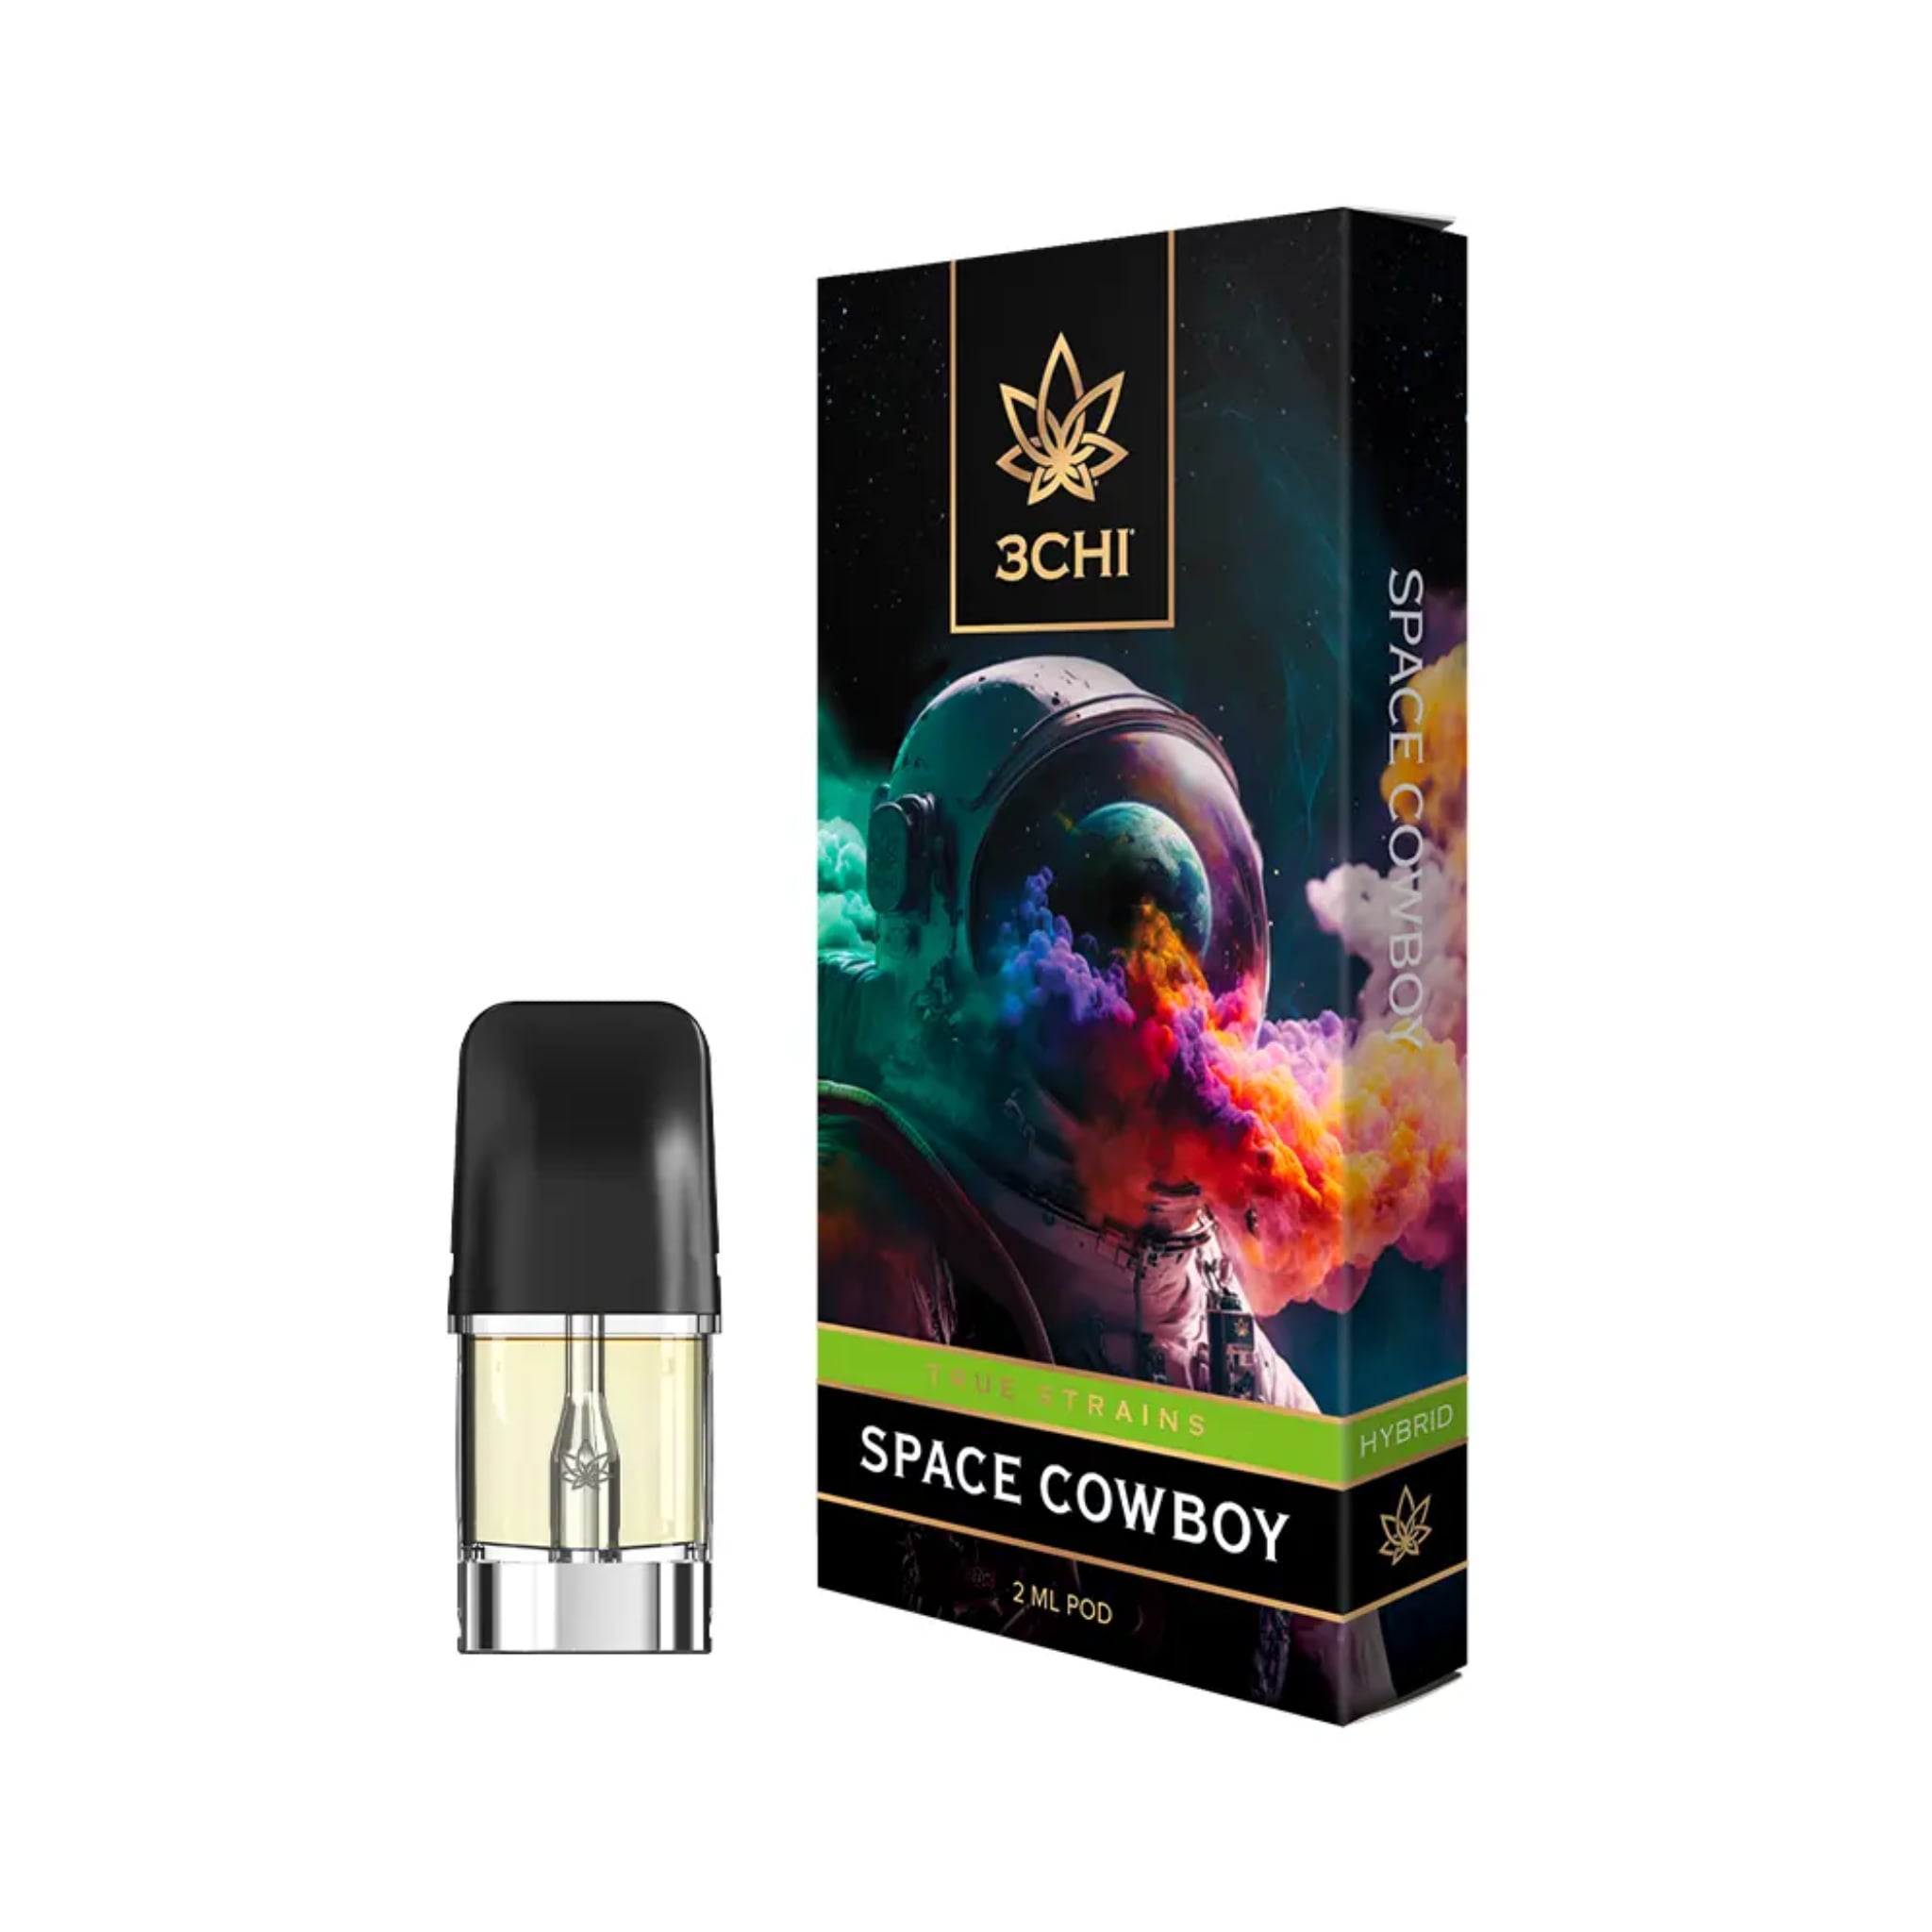 3Chi Space Cowboy 2g Hybrid - Battery and Cart True Strains